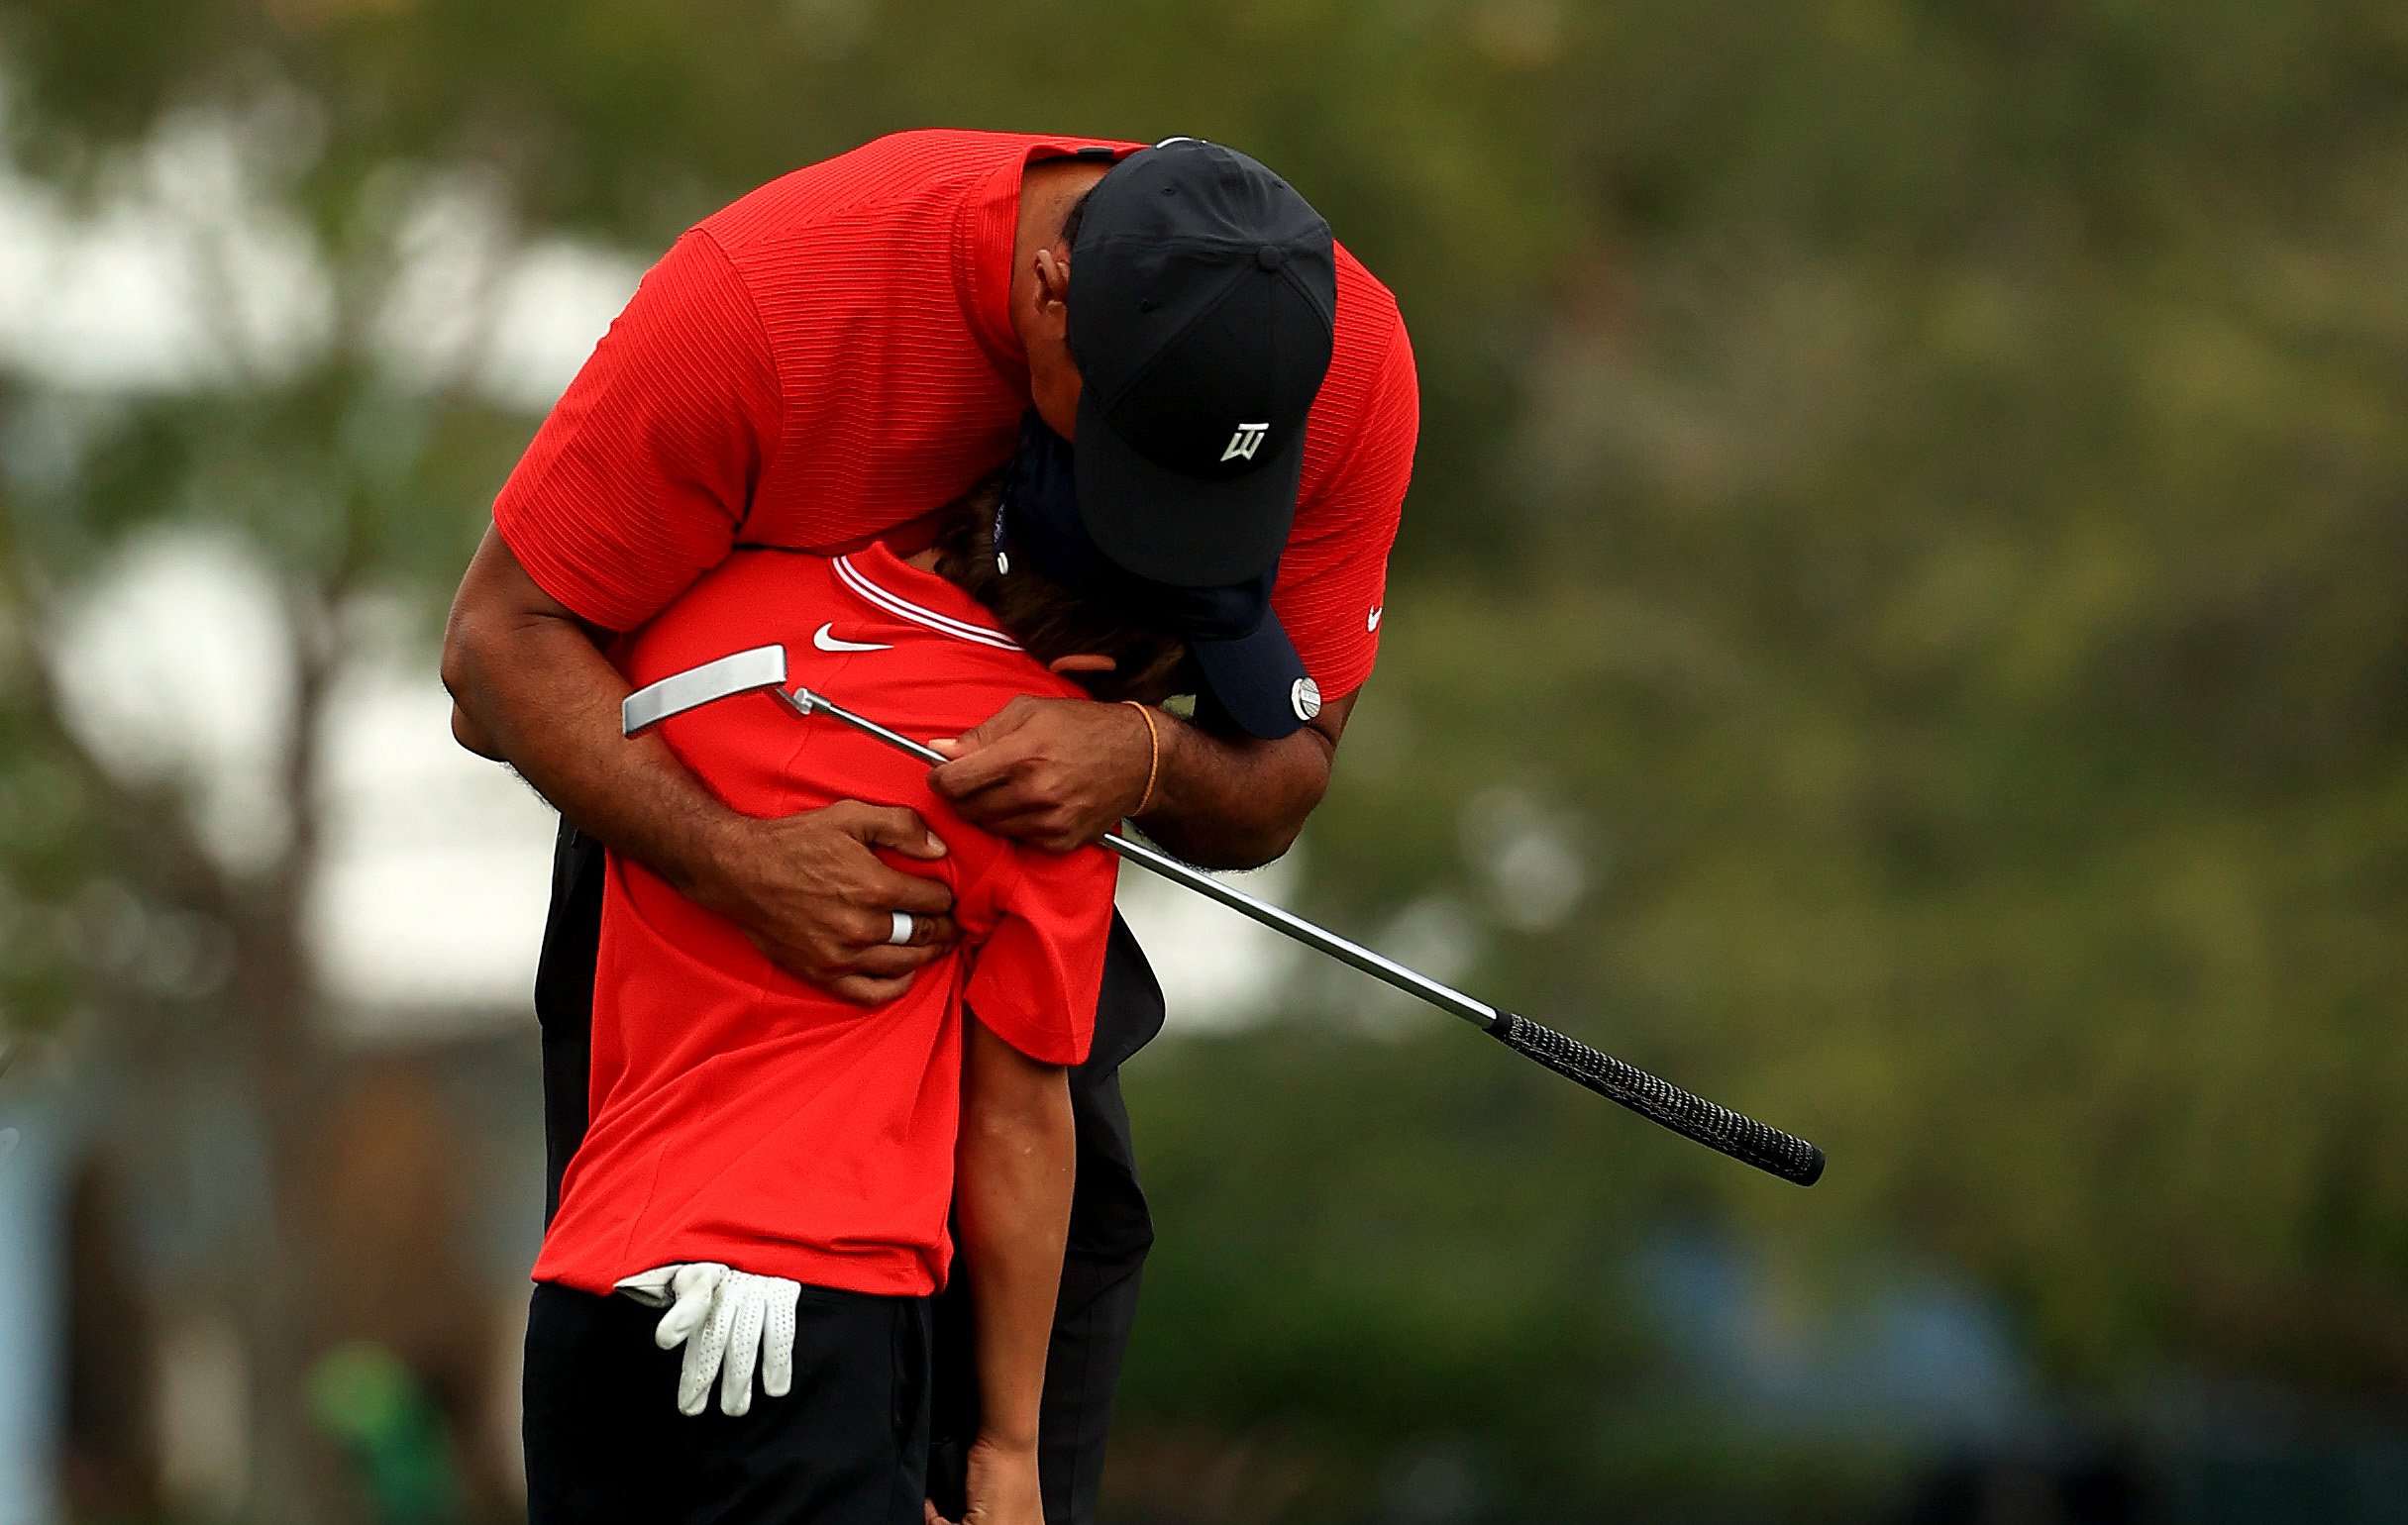 Tiger Woods of the United States and son Charlie Woods hug at the Ritz Carlton Golf Club on December 20, 2020 in Orlando, Florida. | Source: Getty Images